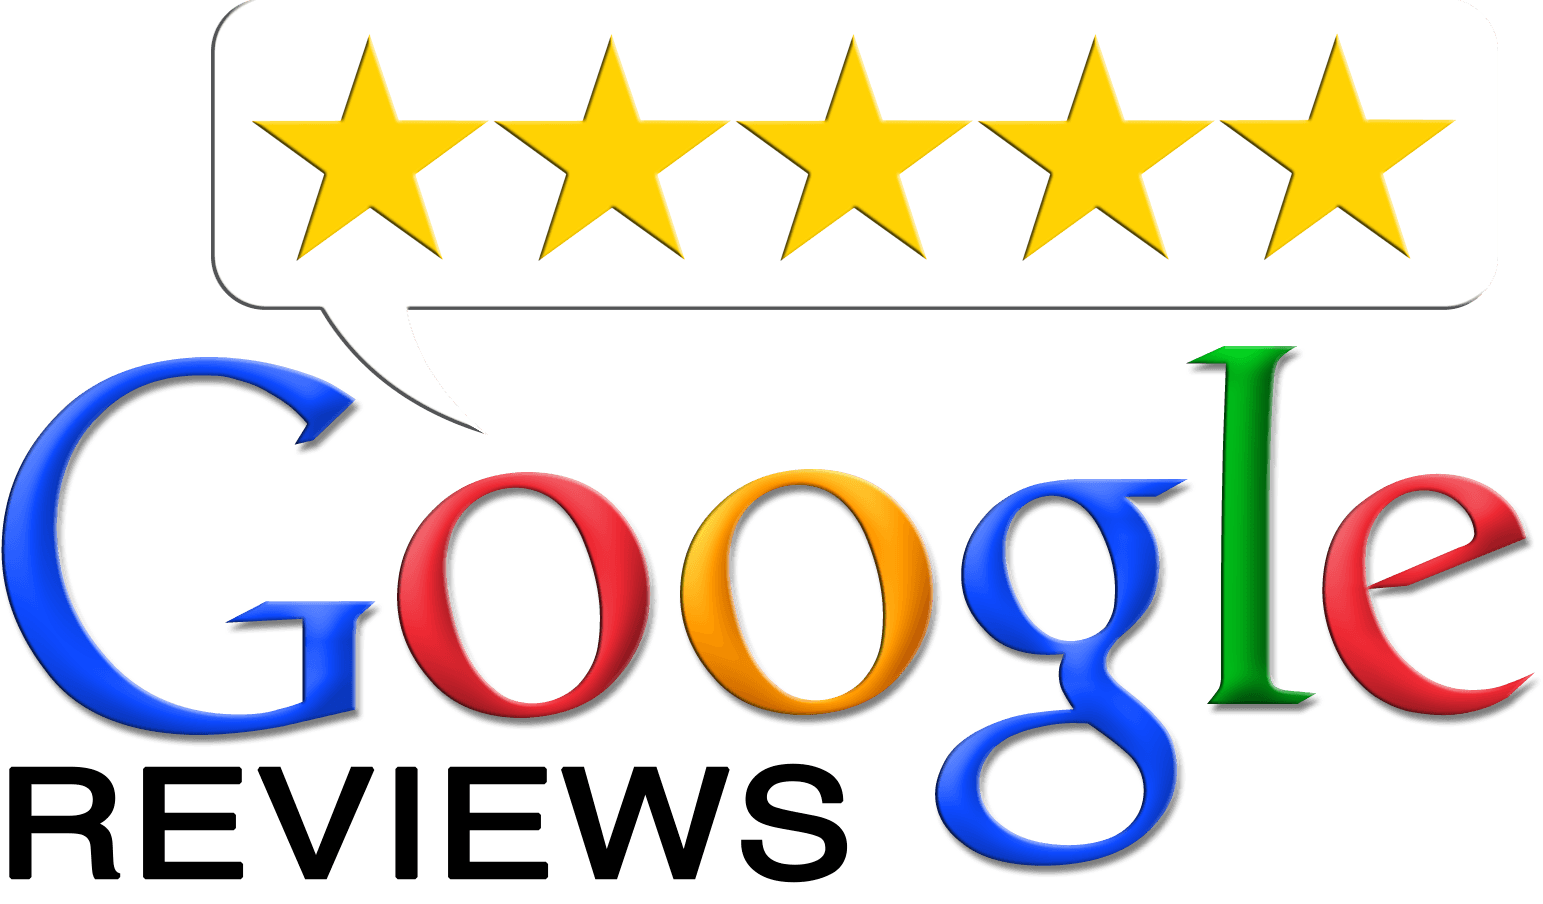 Our Google Review